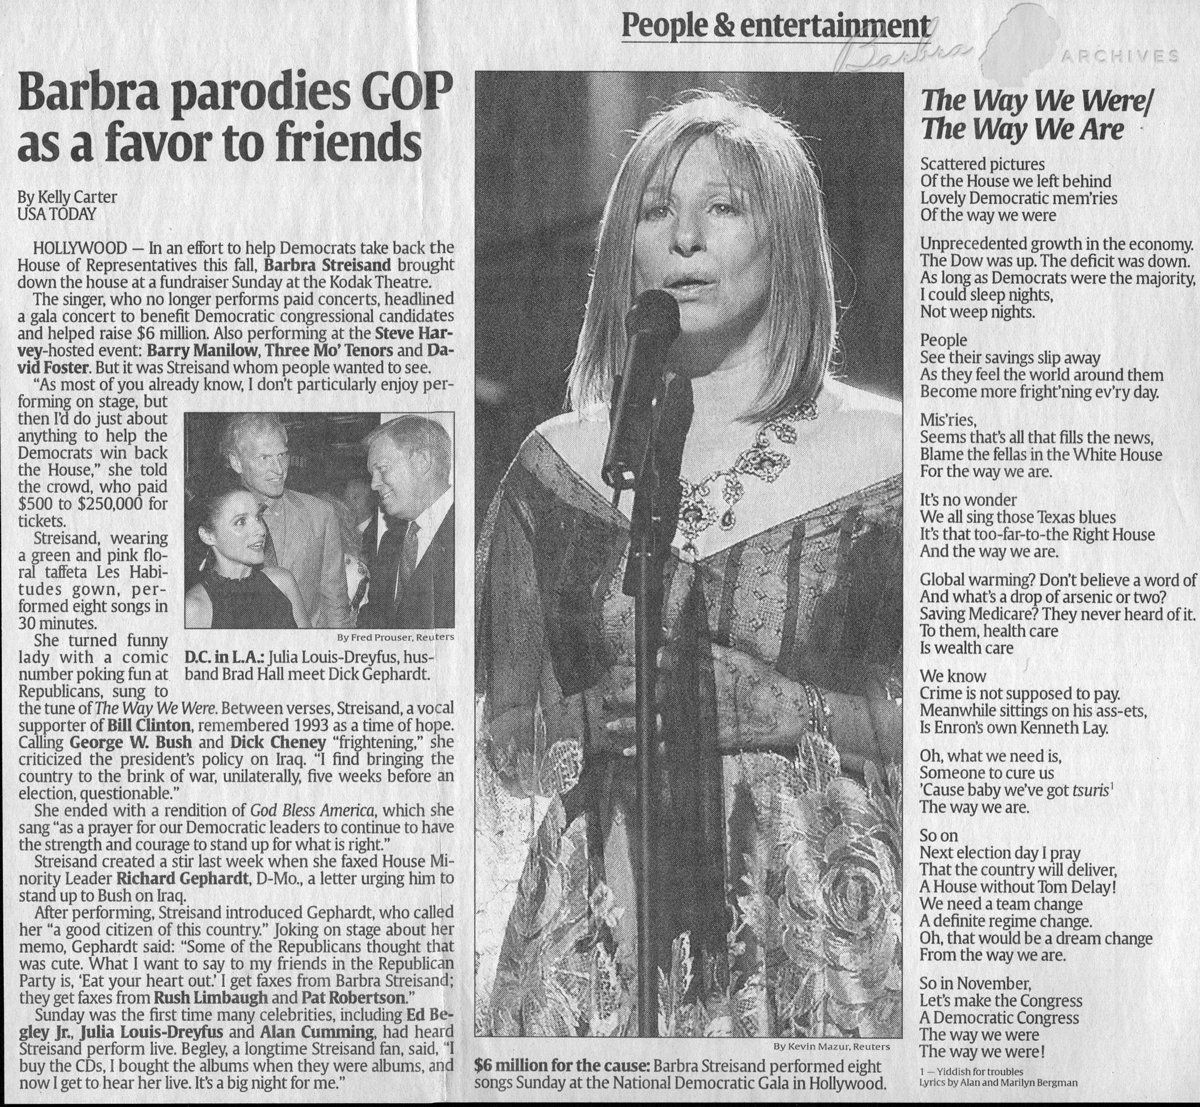 Newspaper article on the Gala, which also printed the special lyrics Barbra sang to The Way We Were that night.